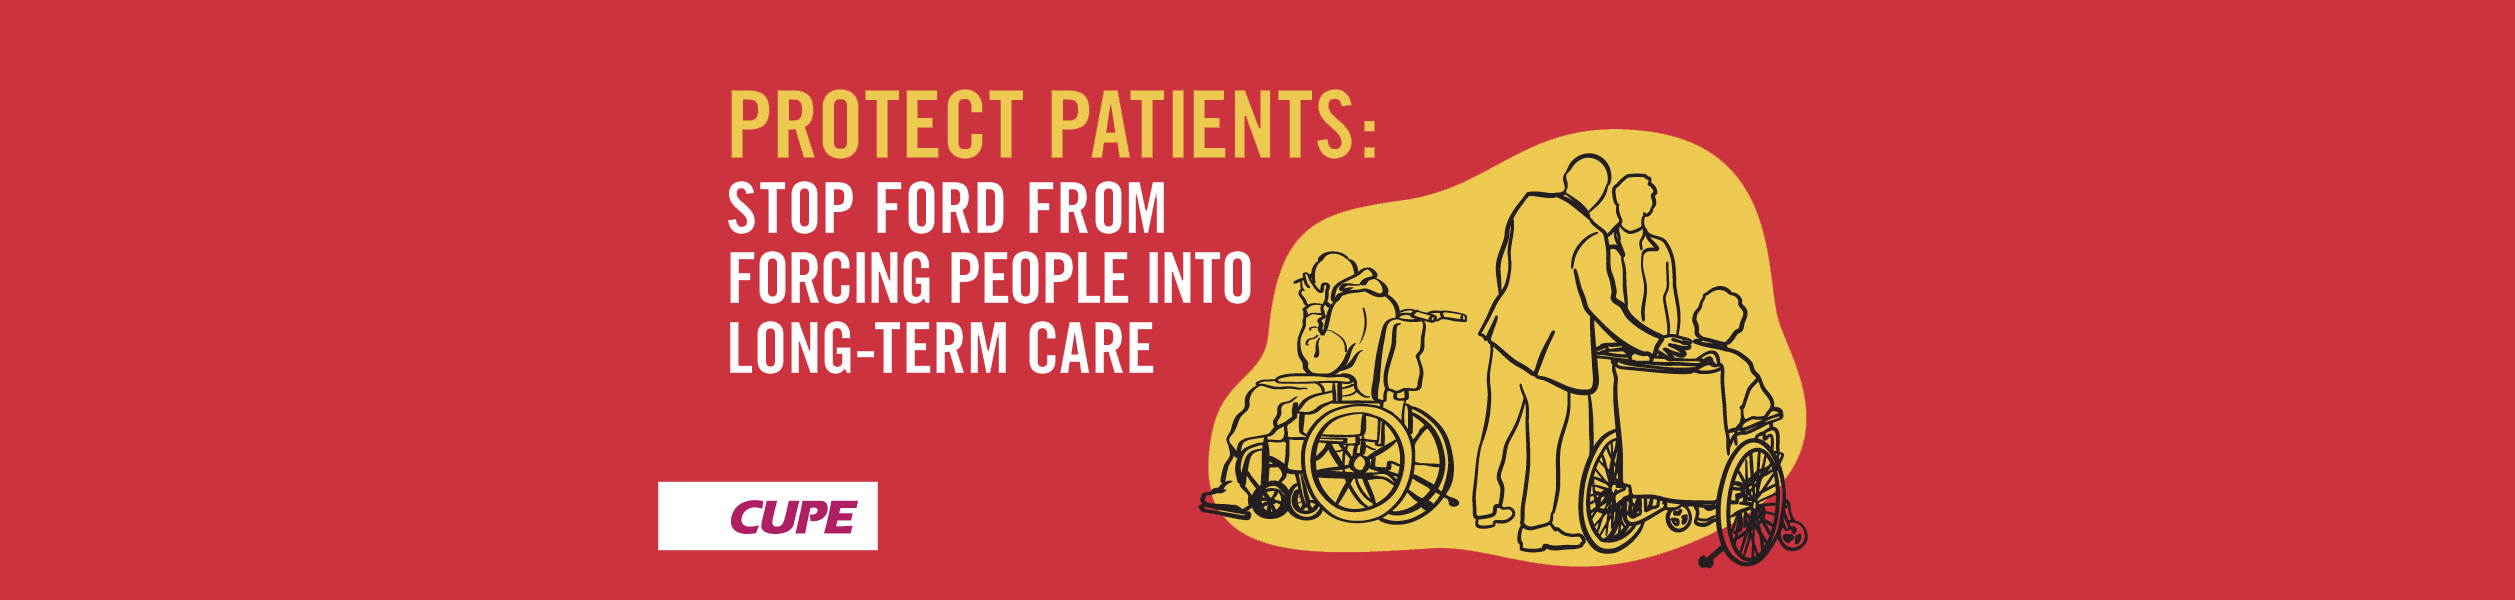 PROTET PATIENTS: STOP FORD FORM FORCING PEOPLEINTO LONG-TERM CARE